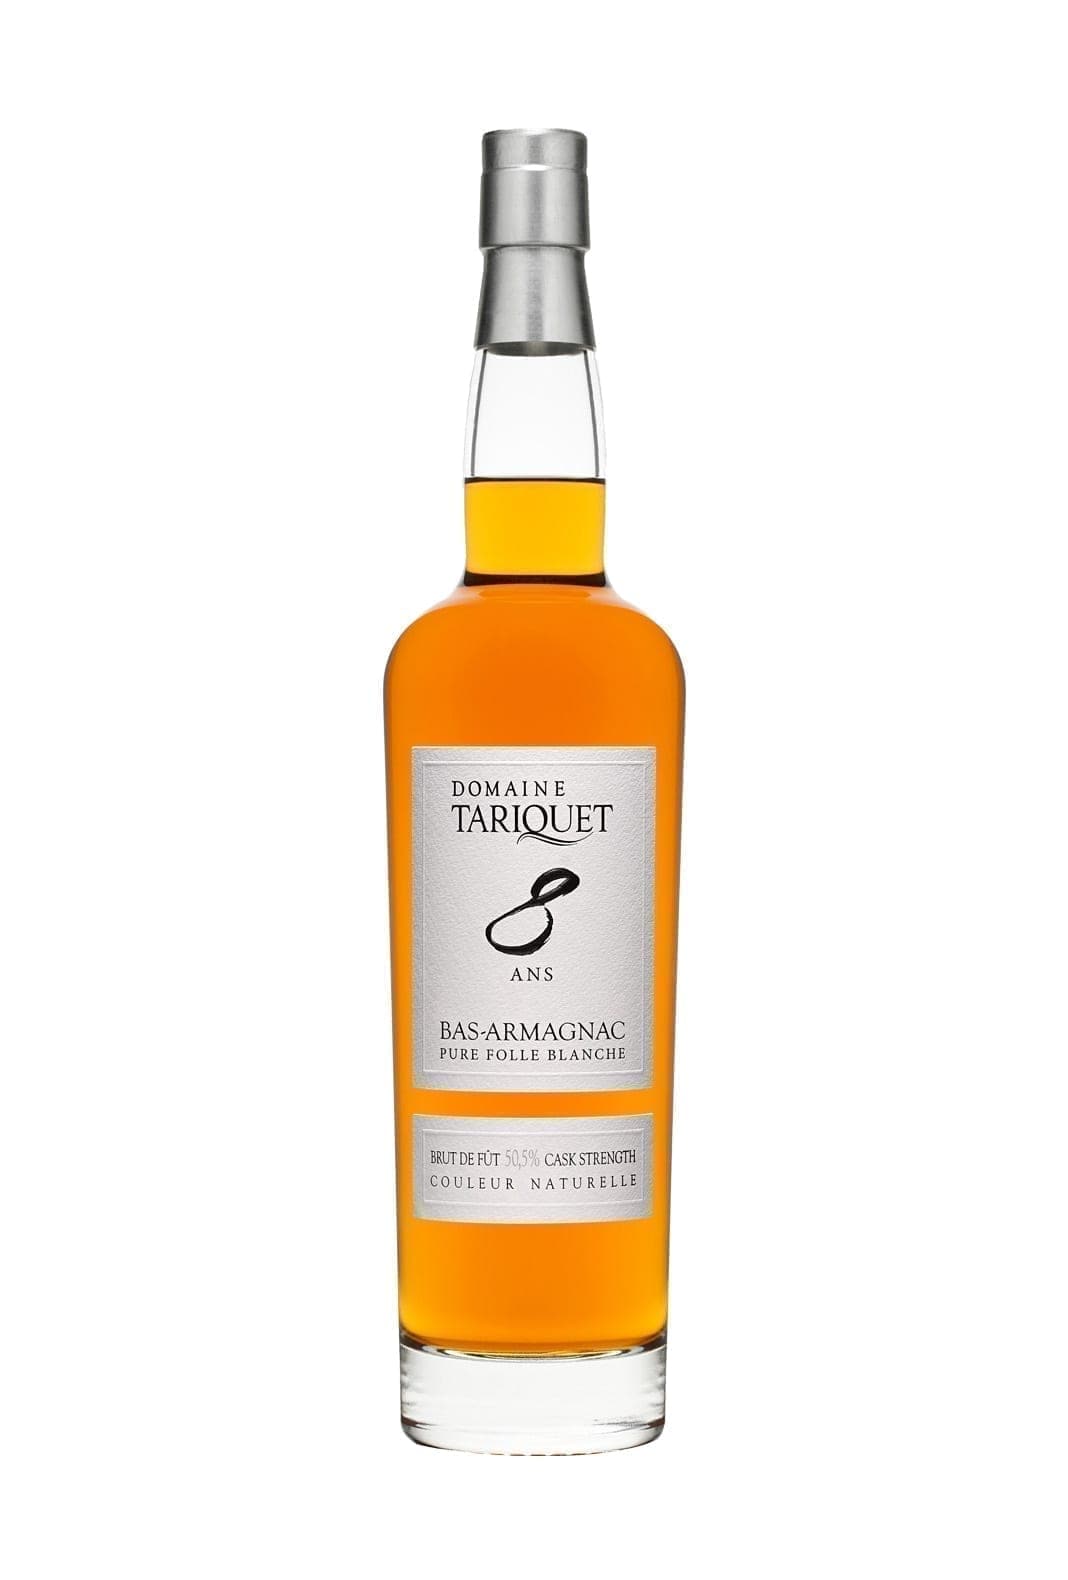 Domaine Tariquet Bas Armagnac Folle Blanche 8 years 51% 700ml | Brandy | Shop online at Spirits of France